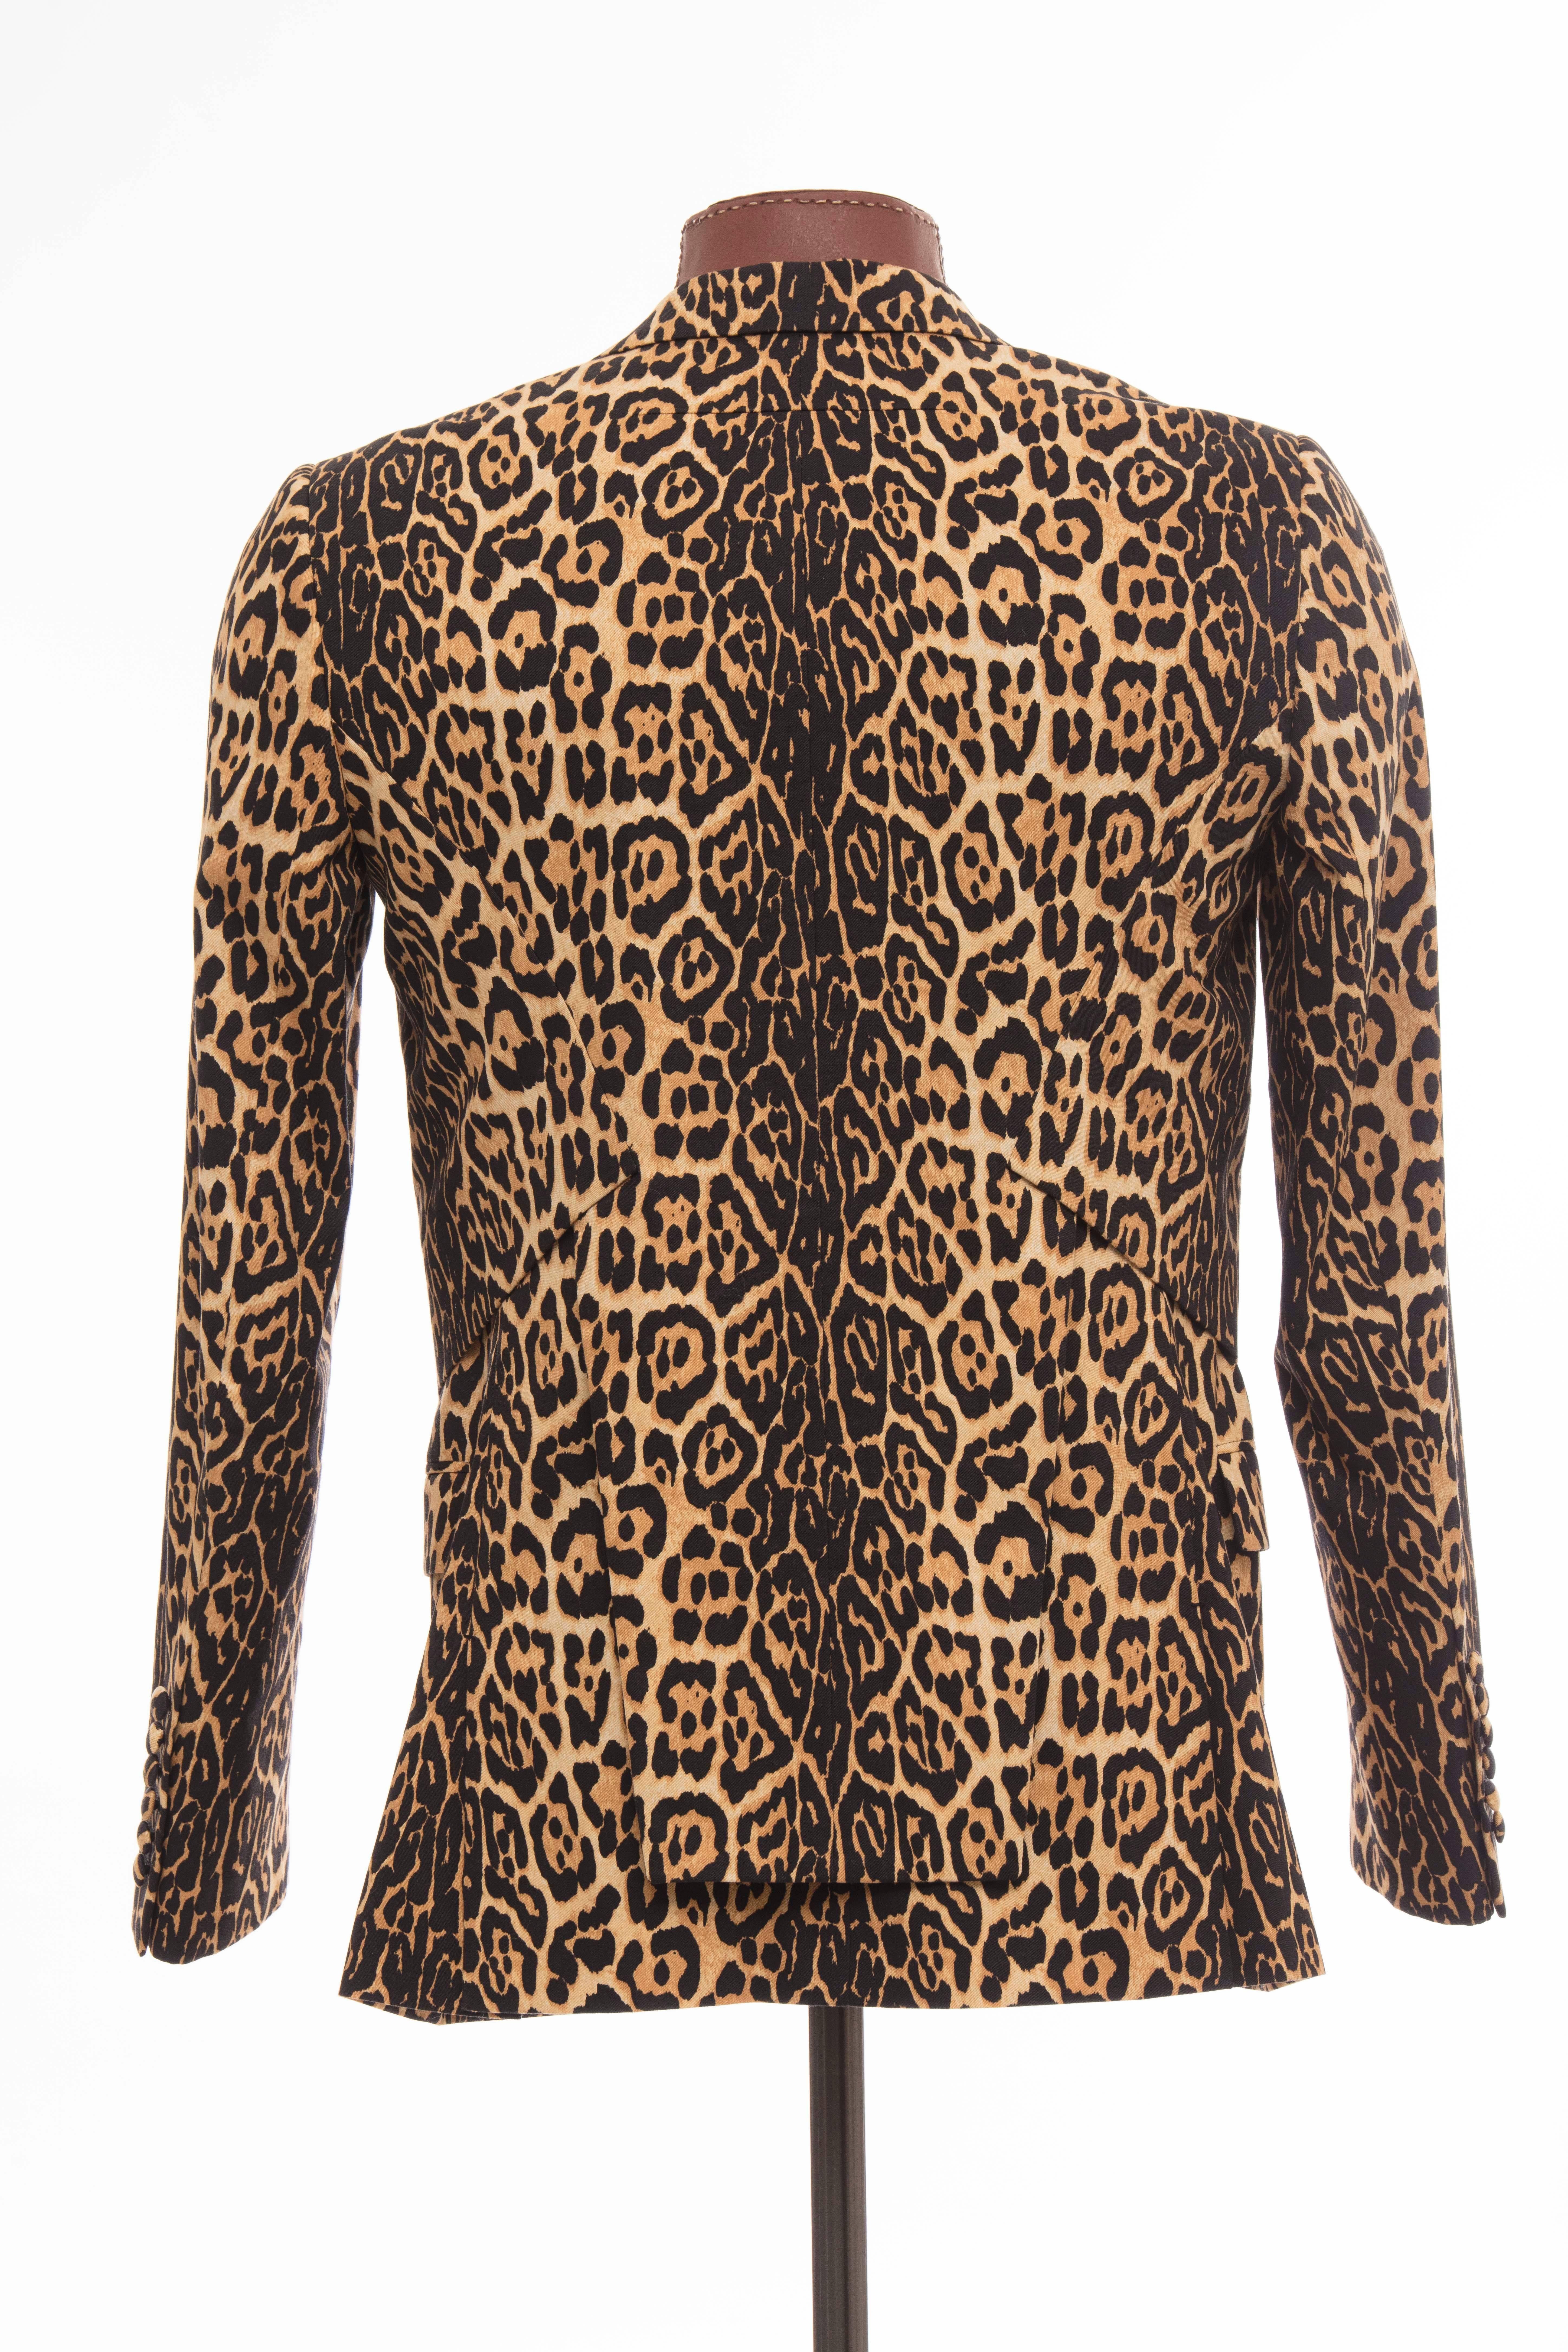 Riccardo Tisci for Givenchy, Spring-Summer 2011 men's runway cotton leopard blazer with notched lapels, slit pocket at chest, dual flap pockets at sides, layered back featuring double vent, black cotton woven lining featuring three welt pockets and